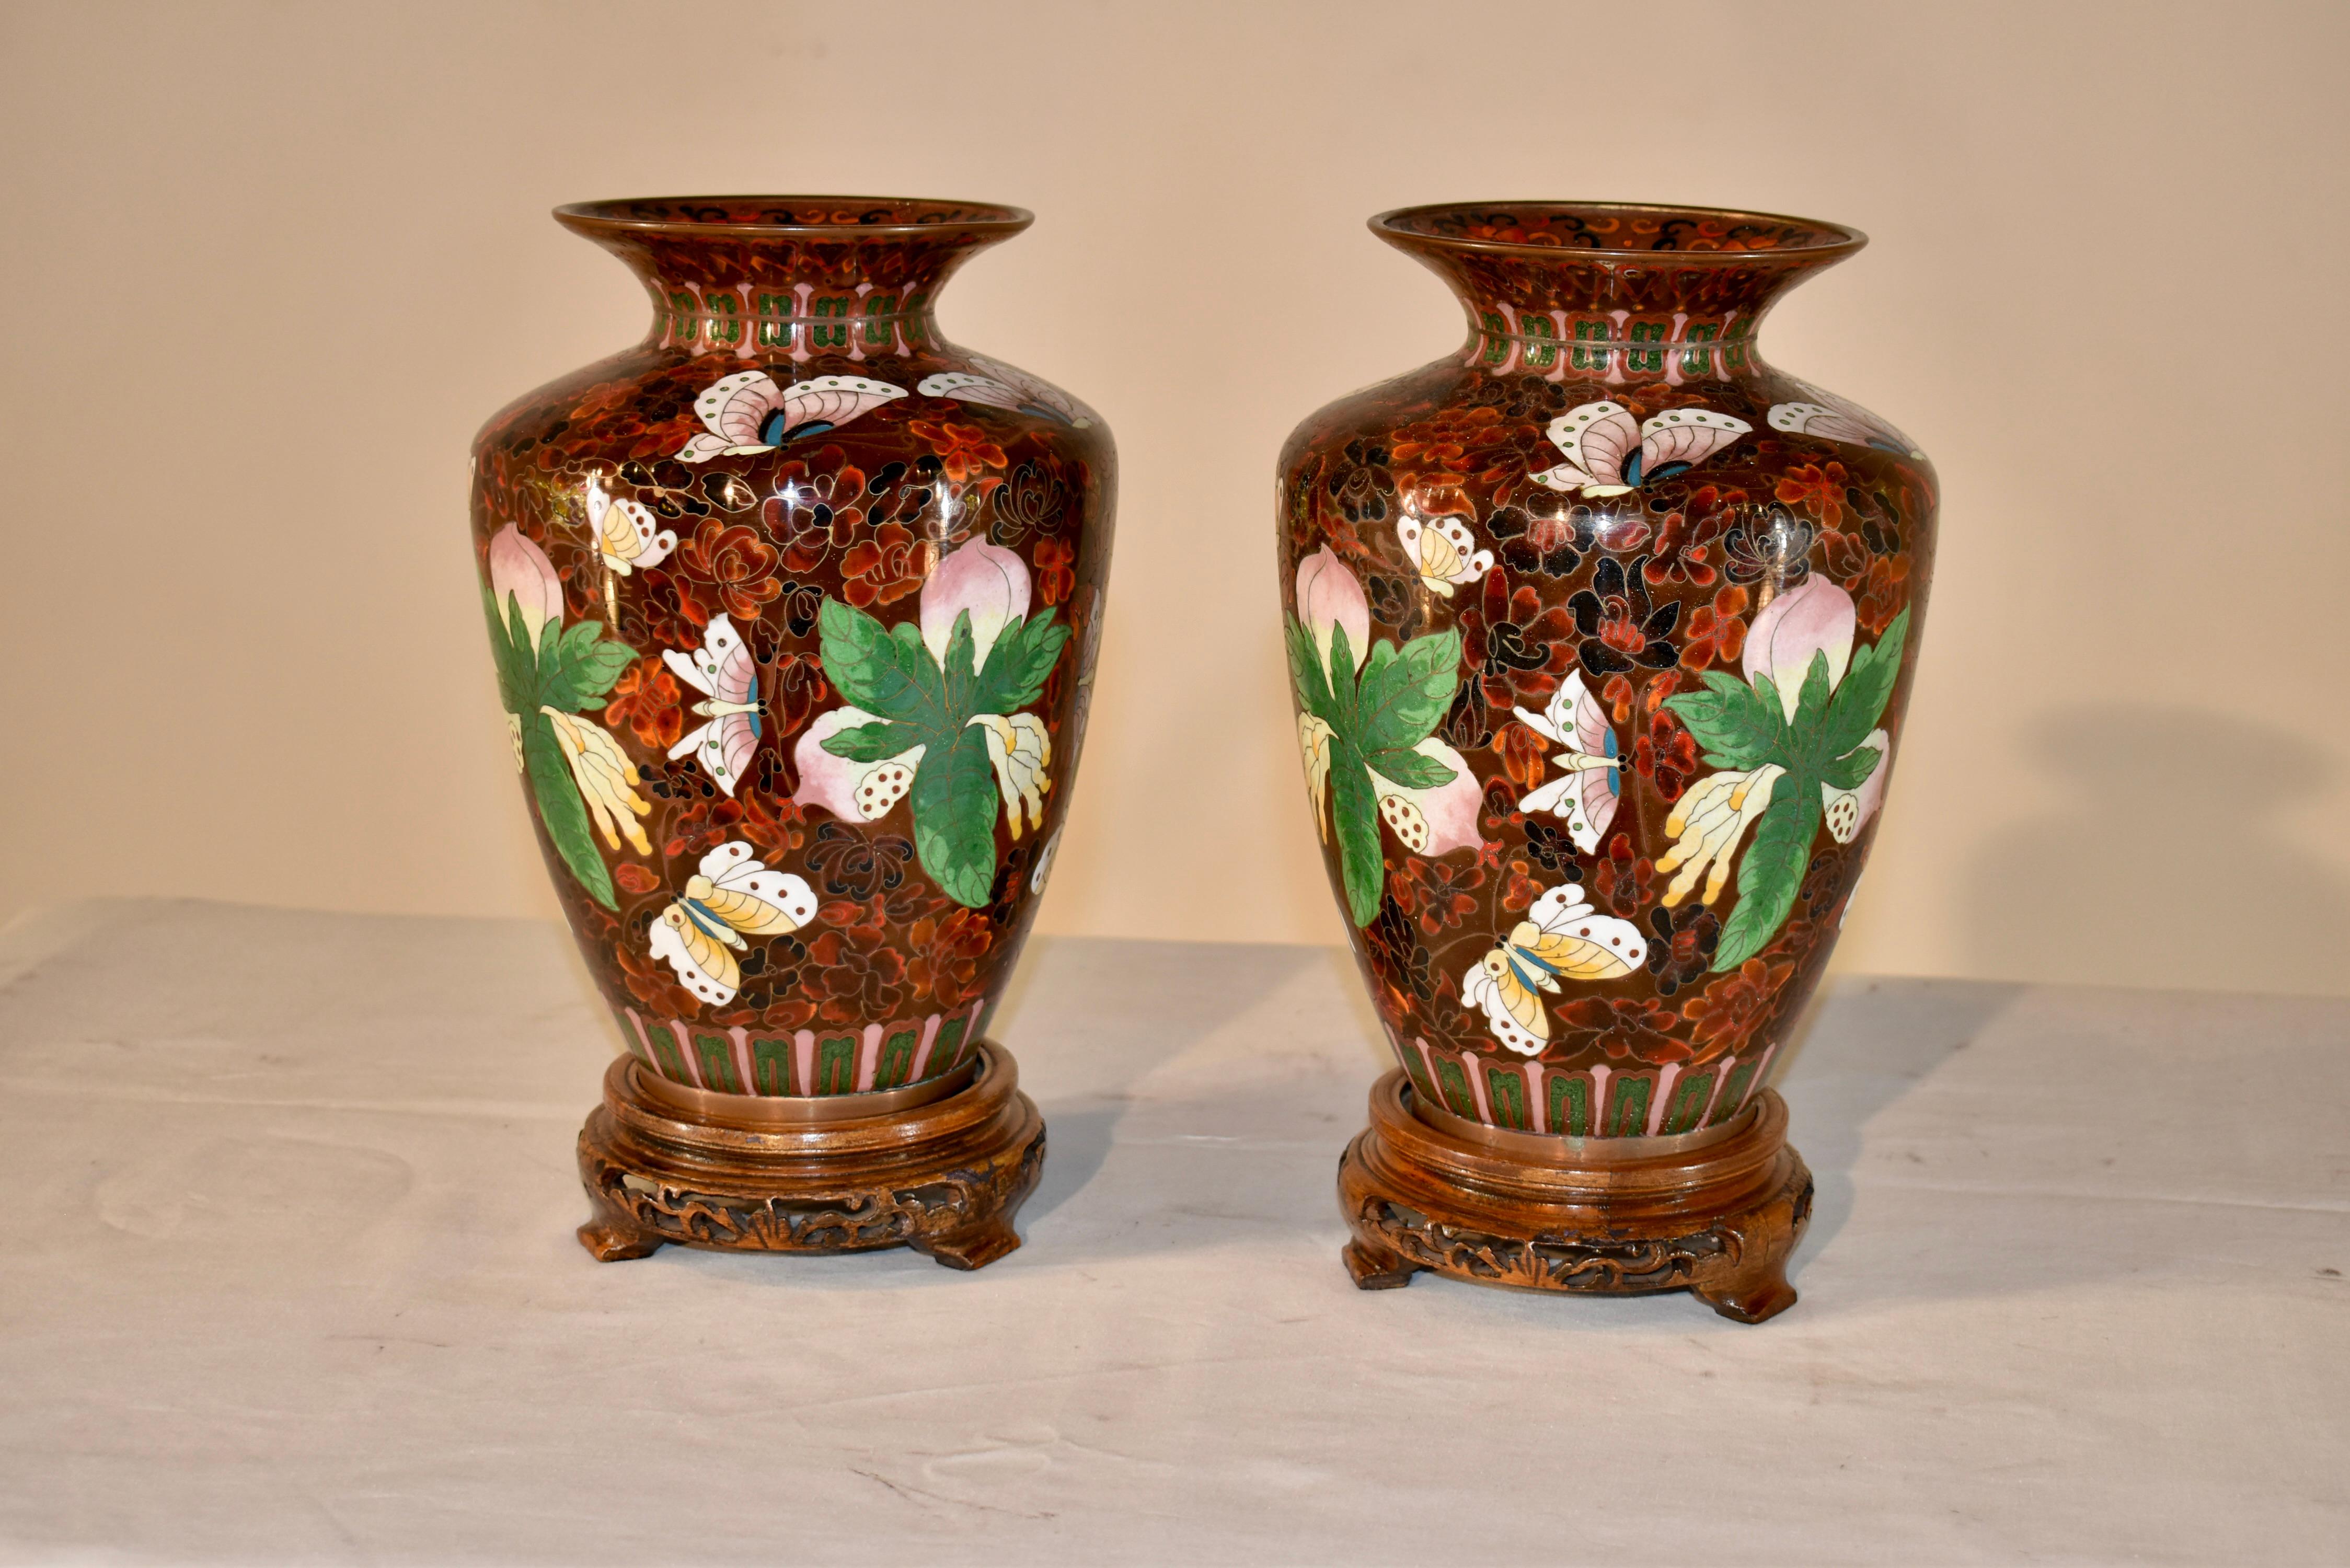 Pair of fantastic 19th century cloisonné vases in fabulous reds, browns, greens and pinks. They have gorgeous floral decoration in vibrant greens and pinks with flitting butterflies all over the vases. They are supported upon hand carved and pierced